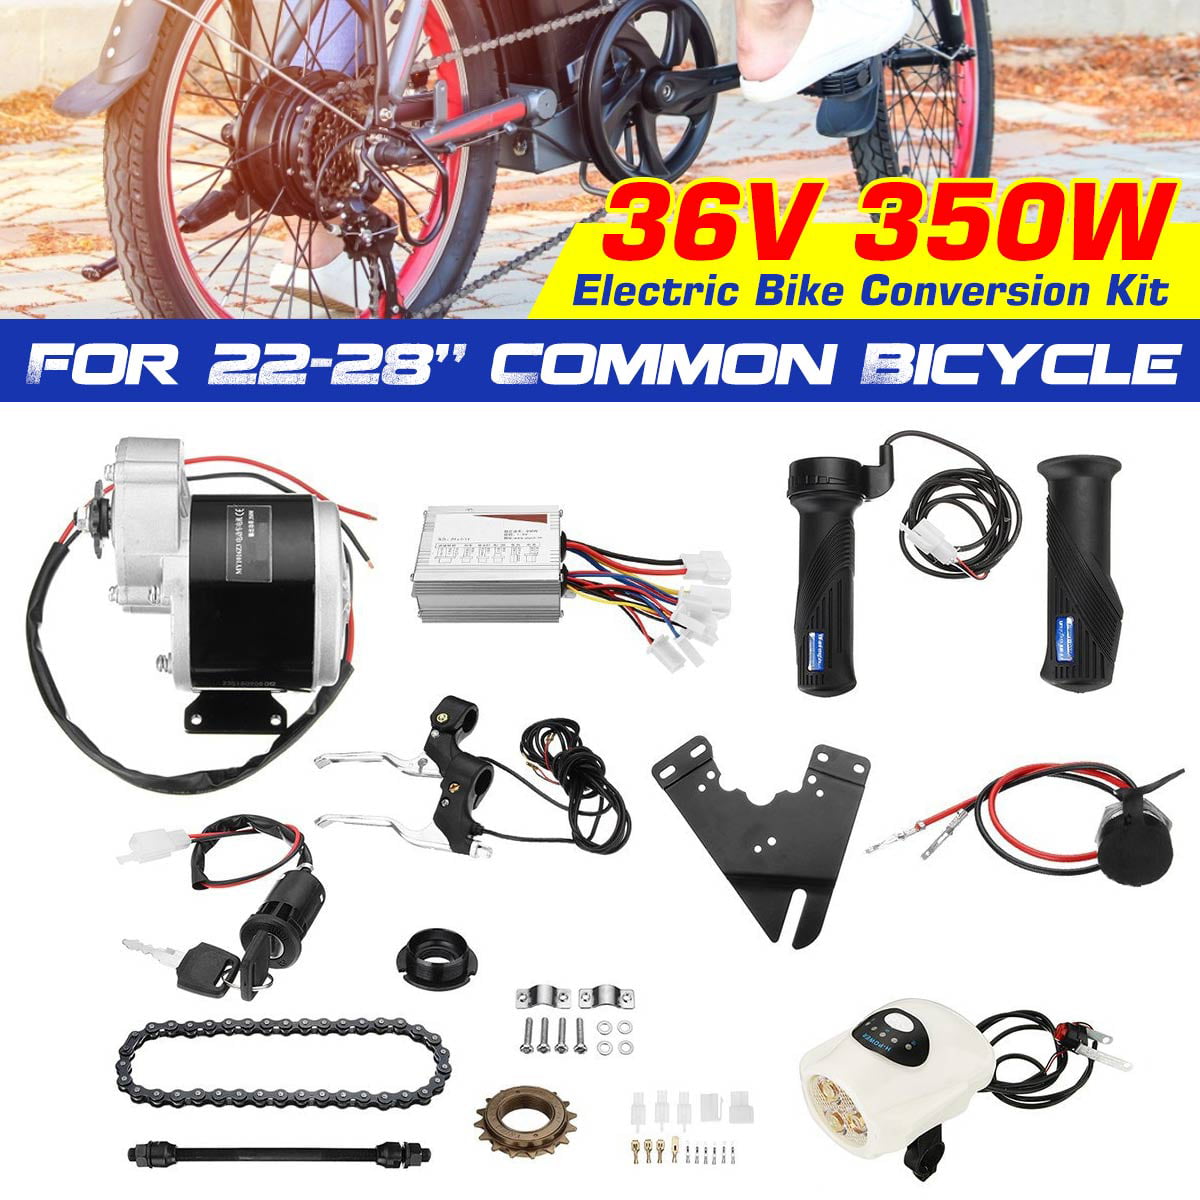 Waterproof Wire for Road Bike E-Bike Conversion Kit 700C Wheel 36V/48V 350W Max Speed 28km/h Motor Electric Bicycle Motor Kits Powerful Controller Set with KT900S LED Display